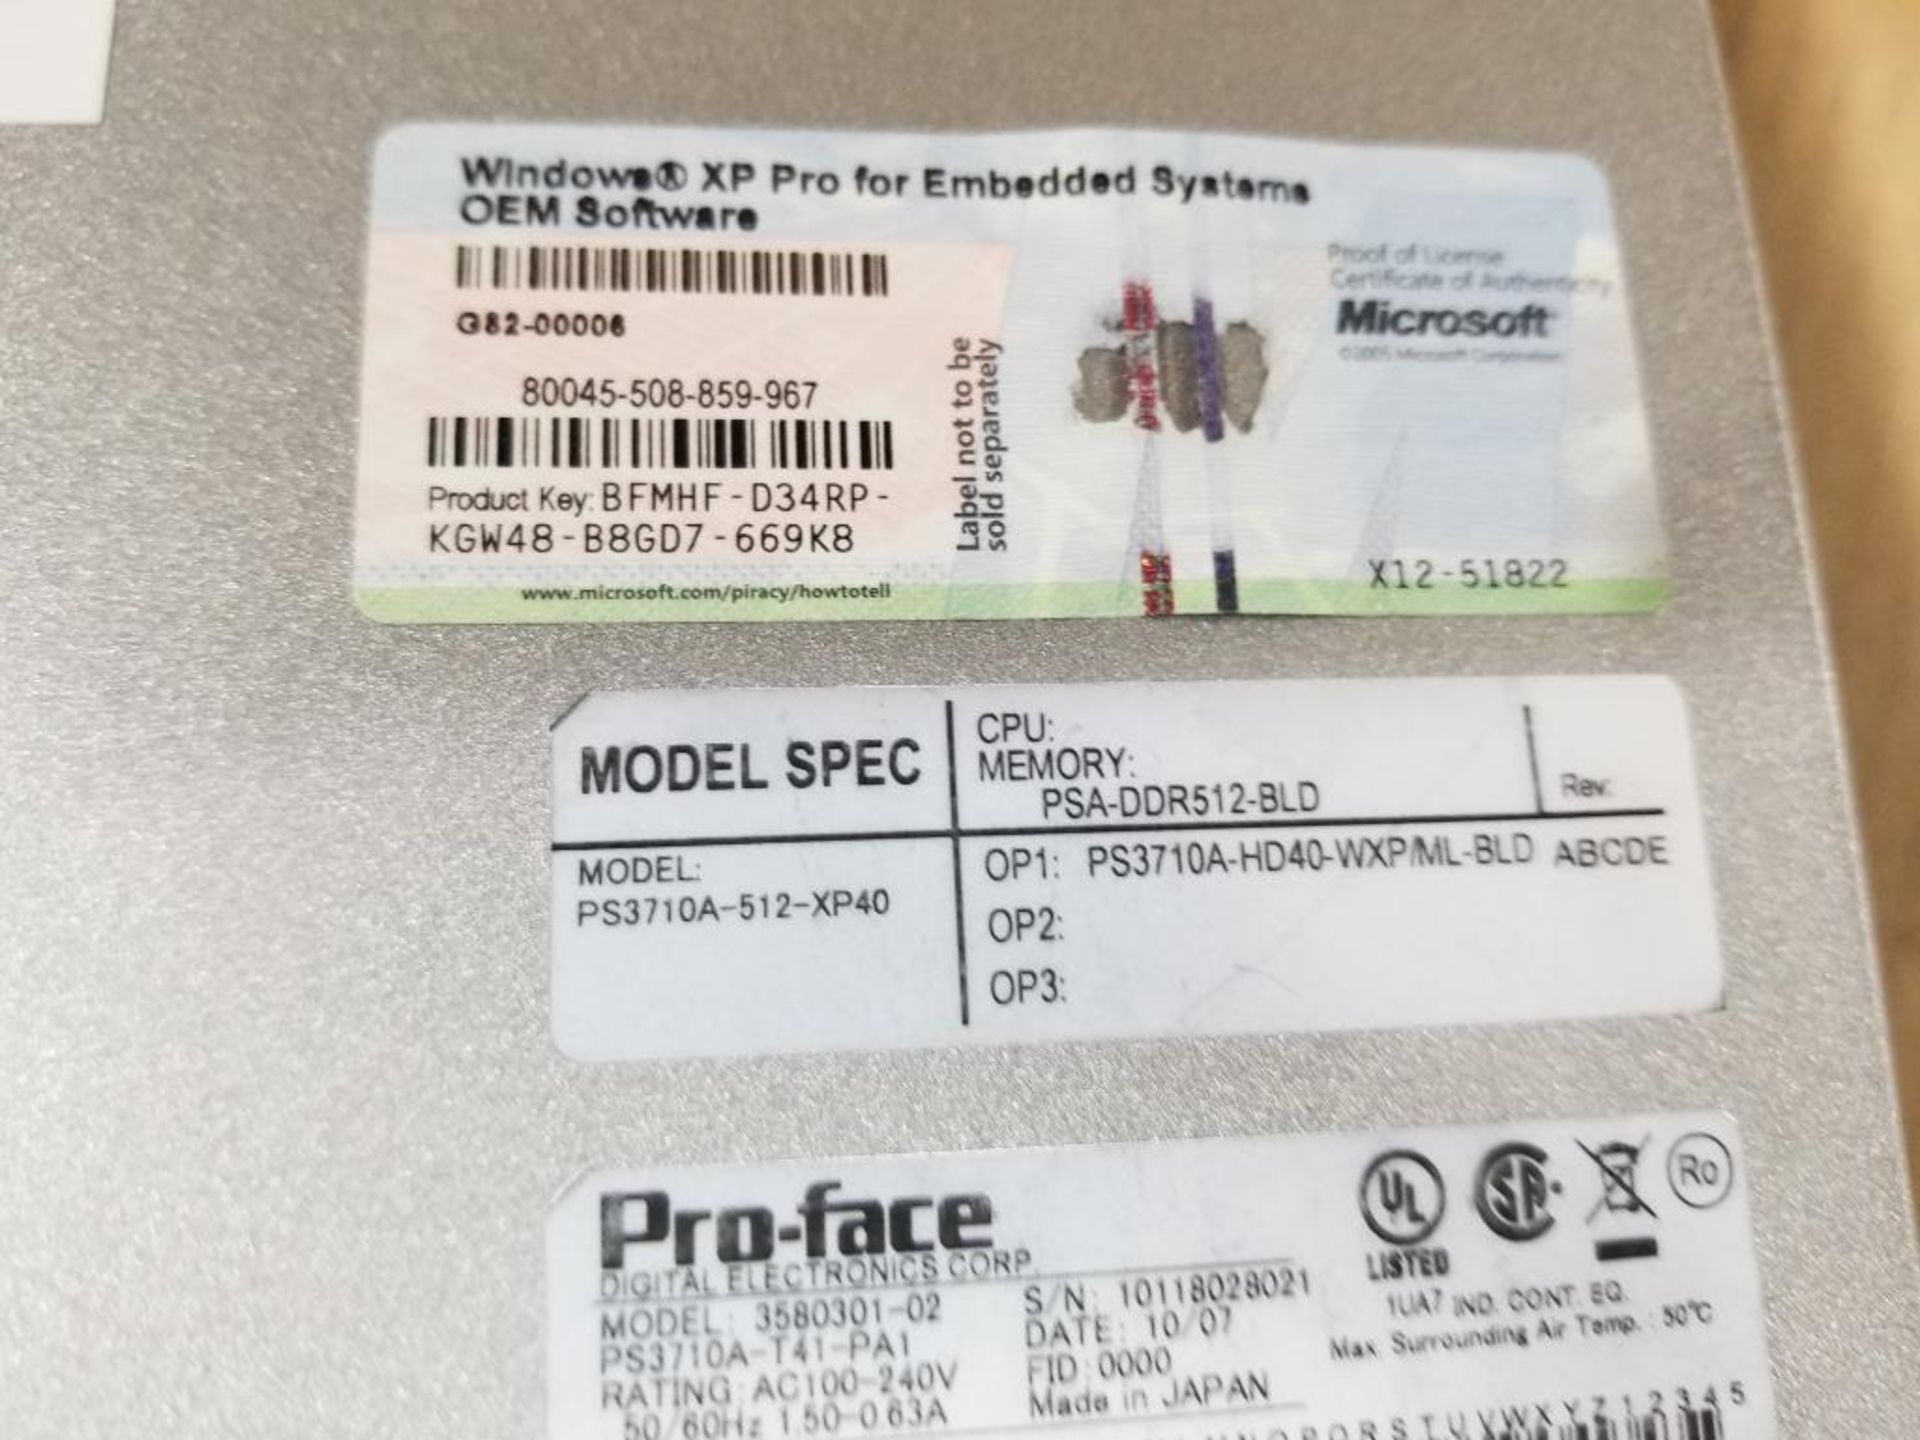 ProFace human machine interface. Model number 3580301-02. Part number PS3710A-T41-PA1. - Image 11 of 11